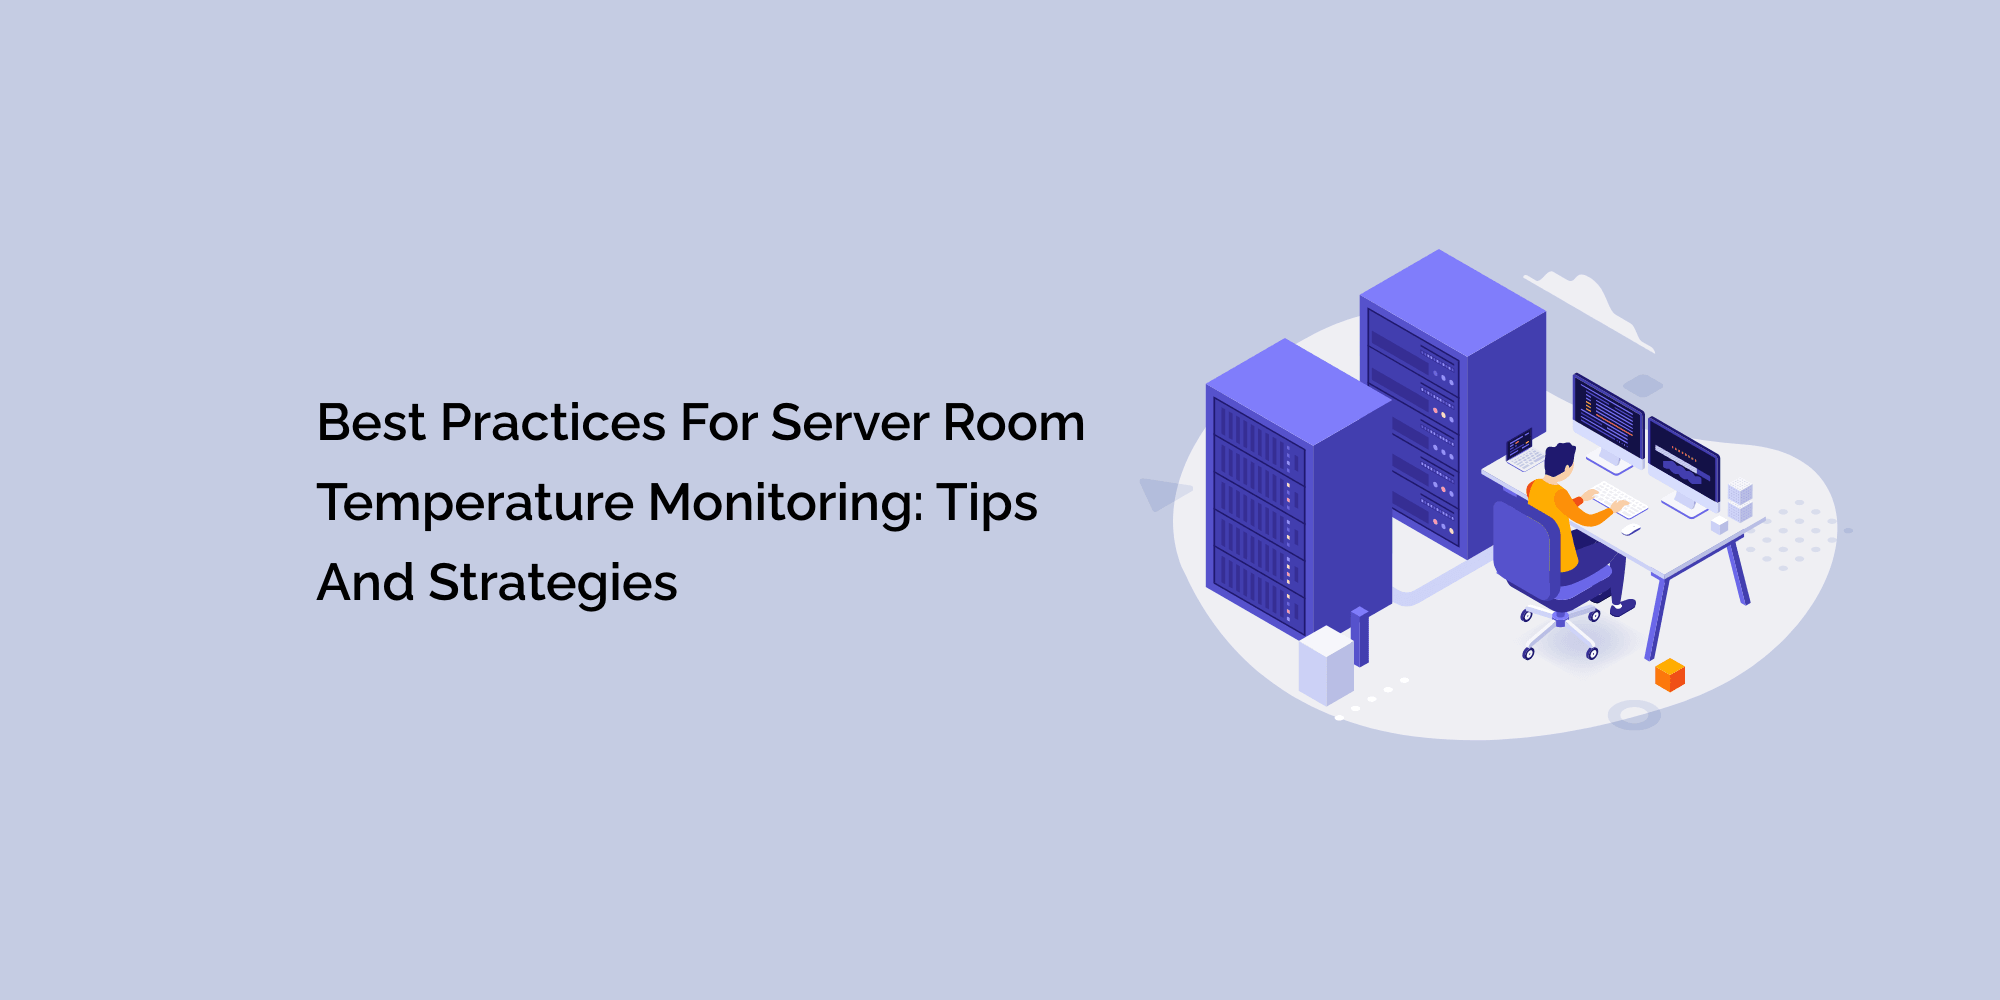 Best Practices for Server Room Temperature Monitoring: Tips and Strategies